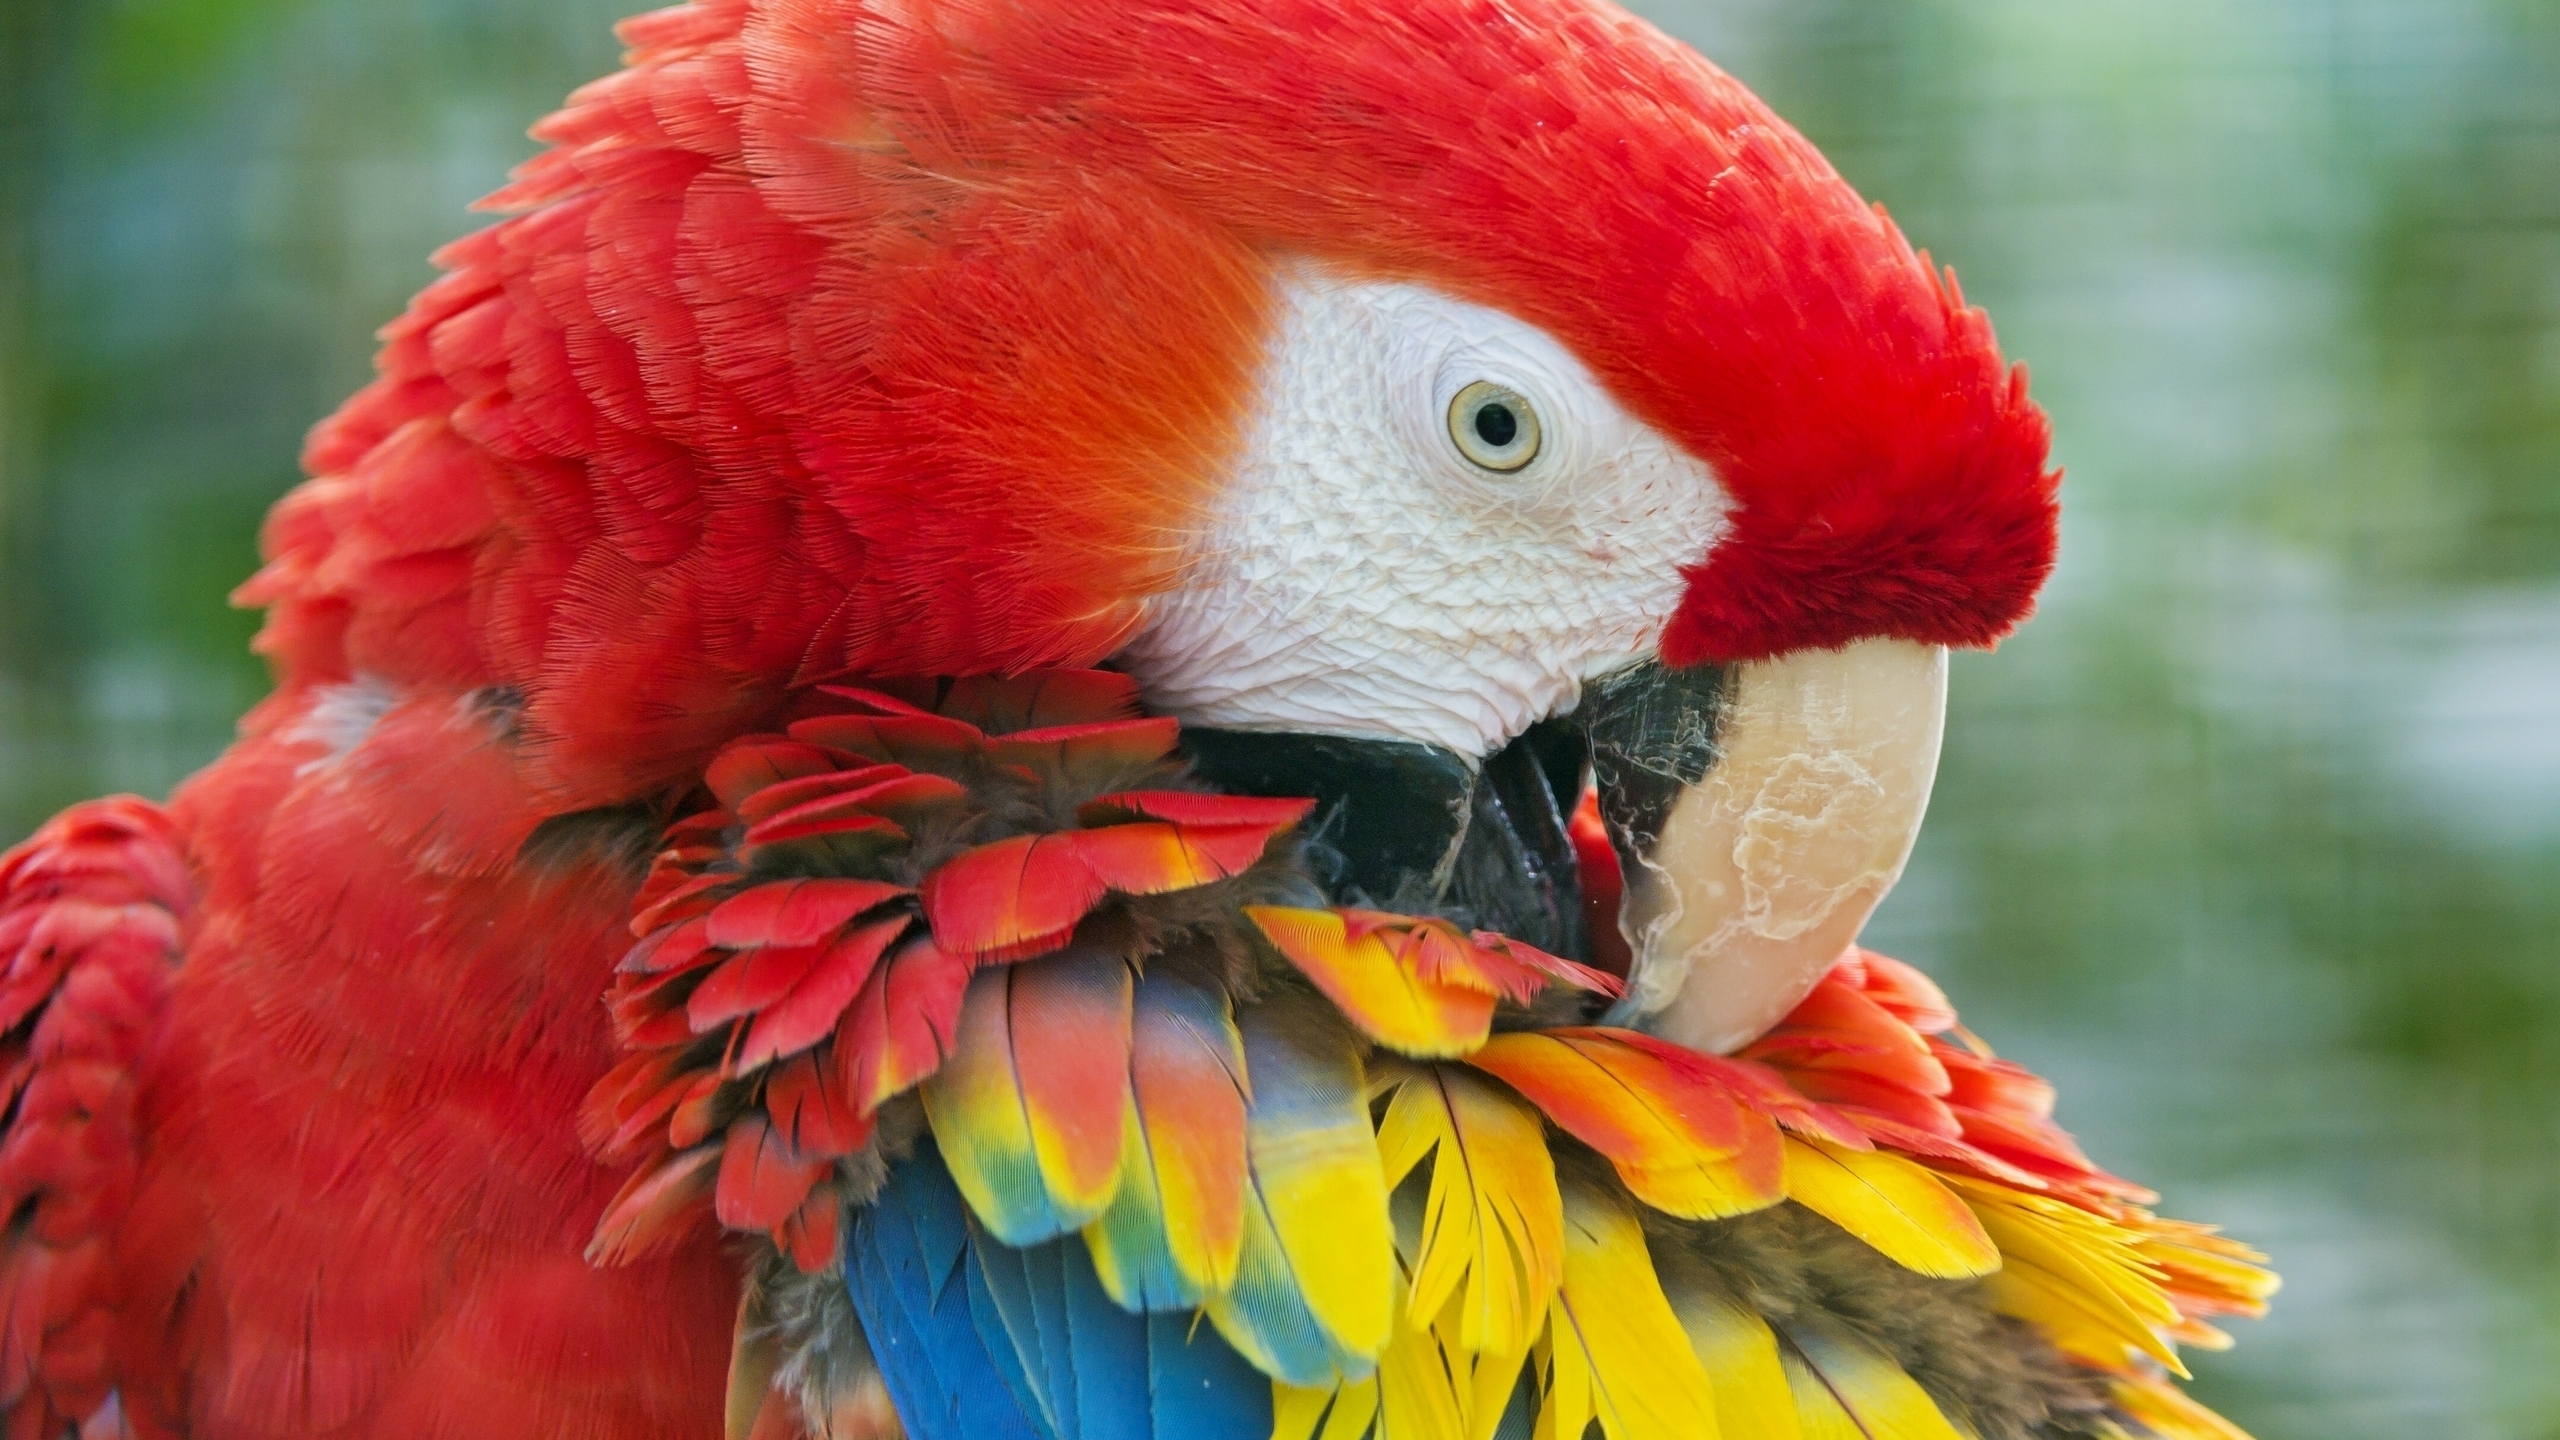 Beauty Red Parrot for 2560x1440 HDTV resolution